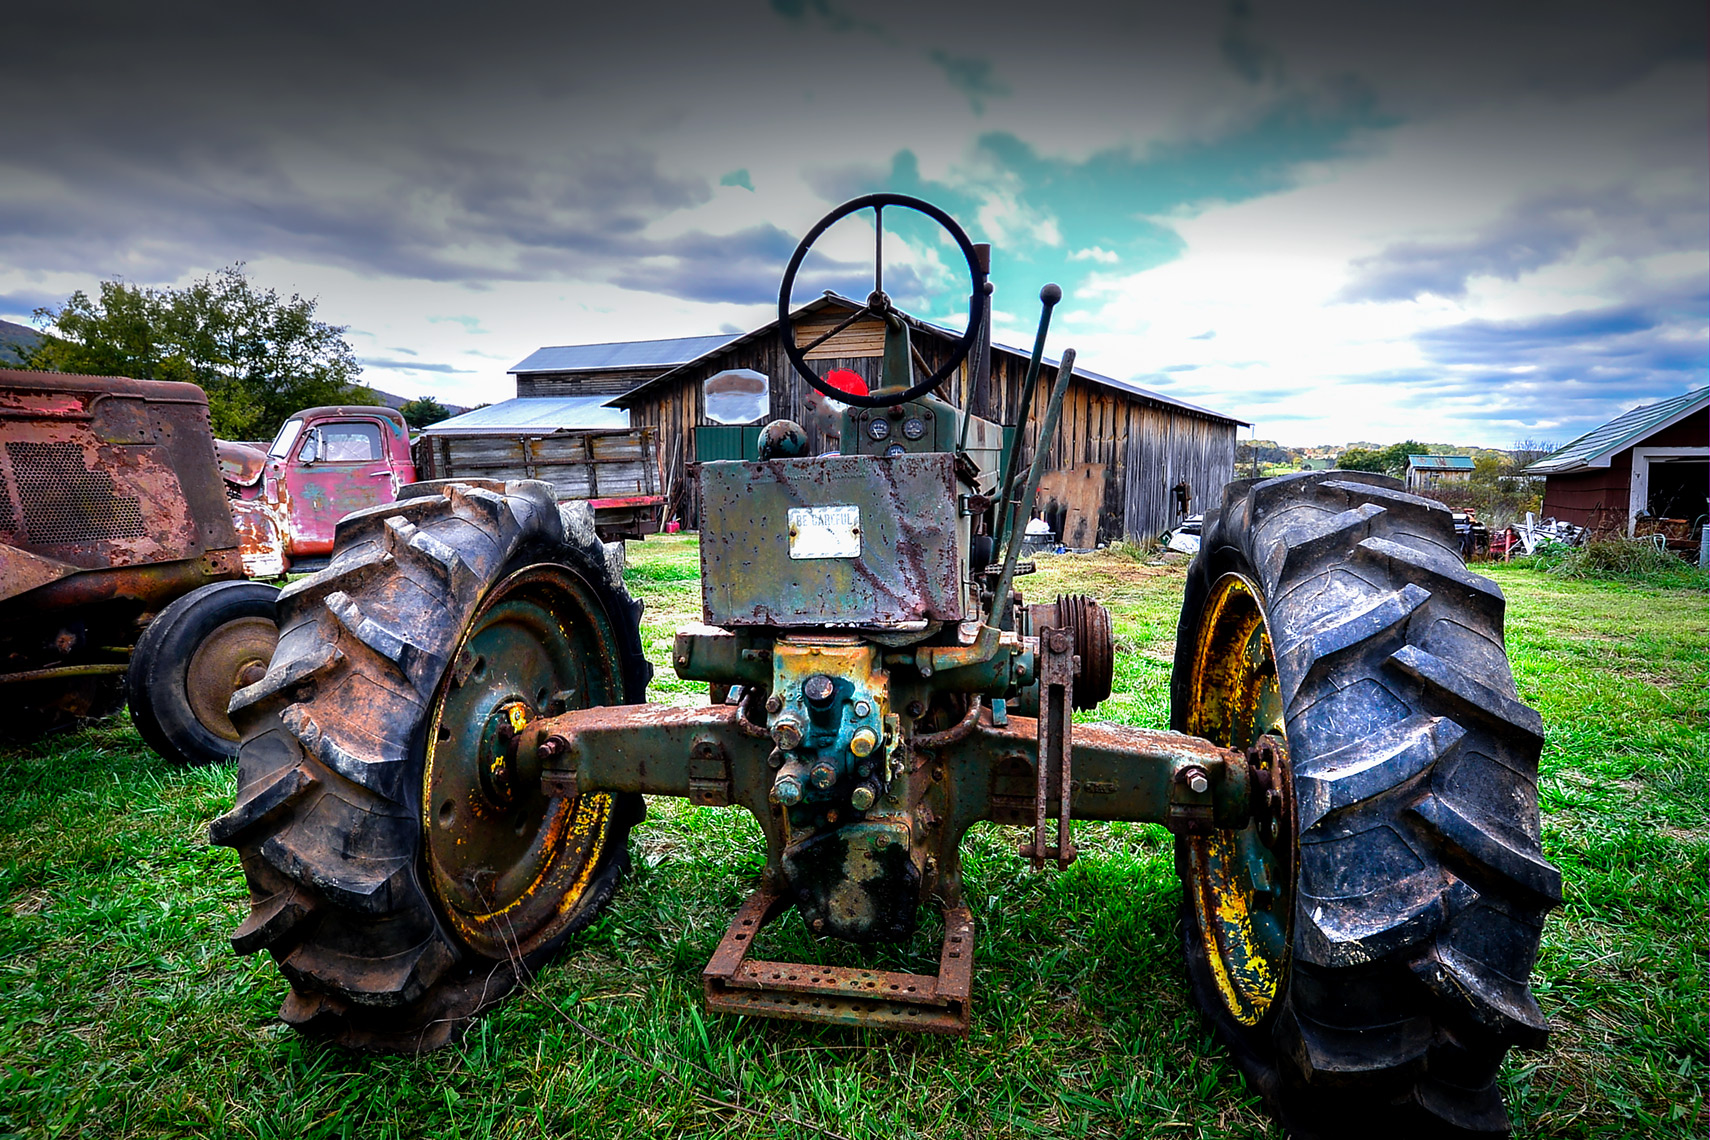 Old Tractor, near Smoky Mountains, Tn.